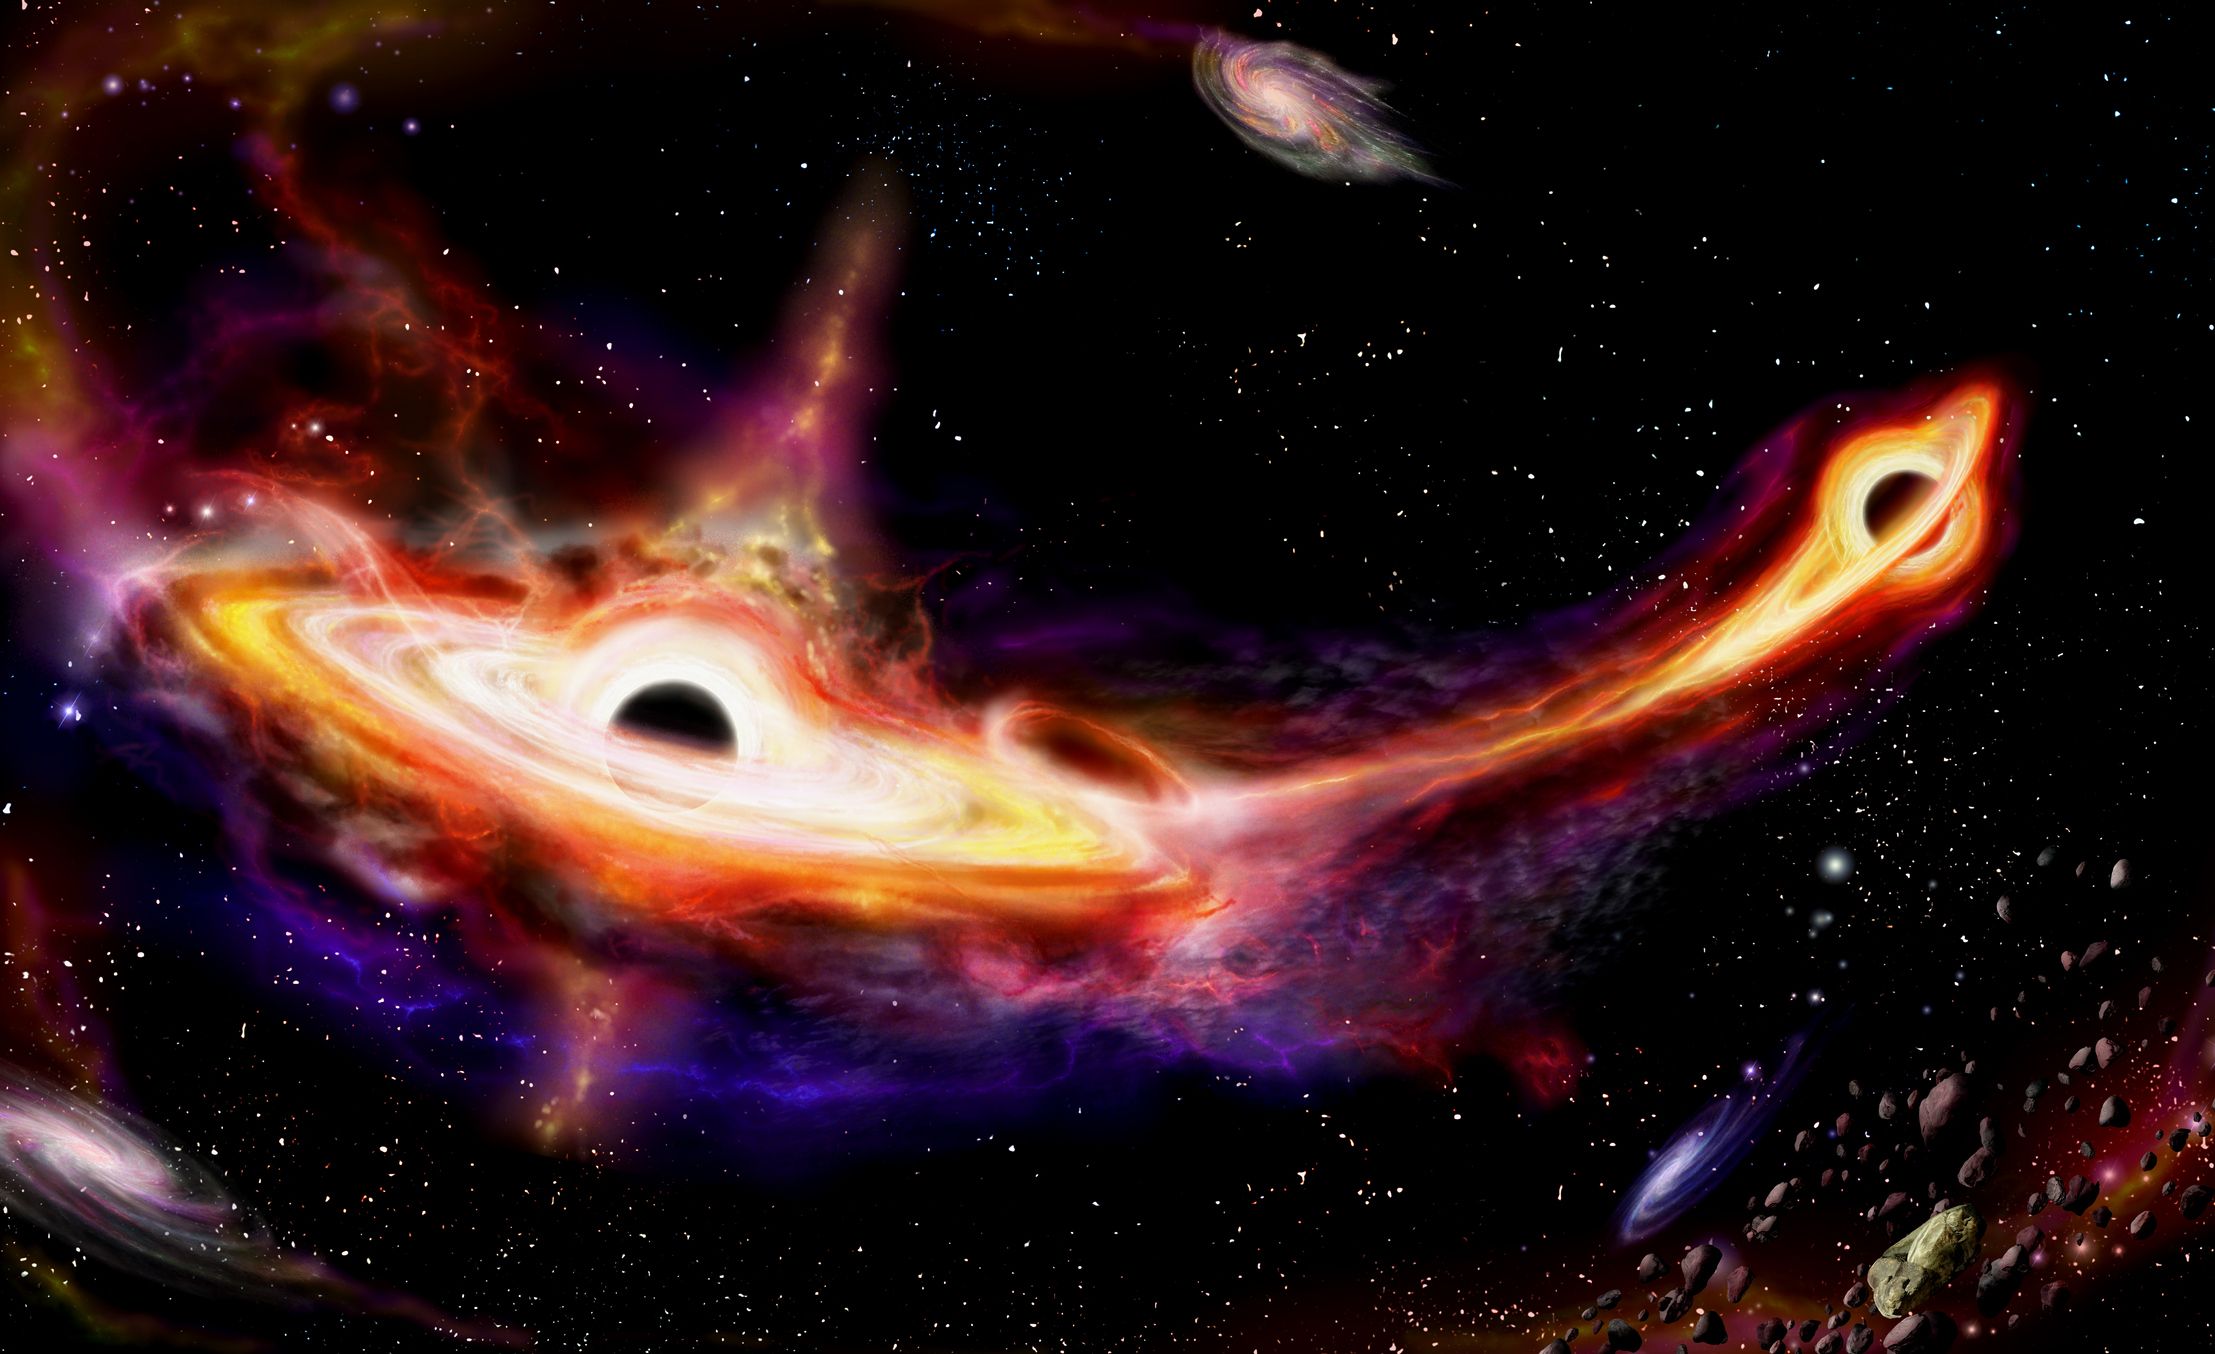 Supermassive Black Holes Near Earth Are Merging Into a 'Monster'